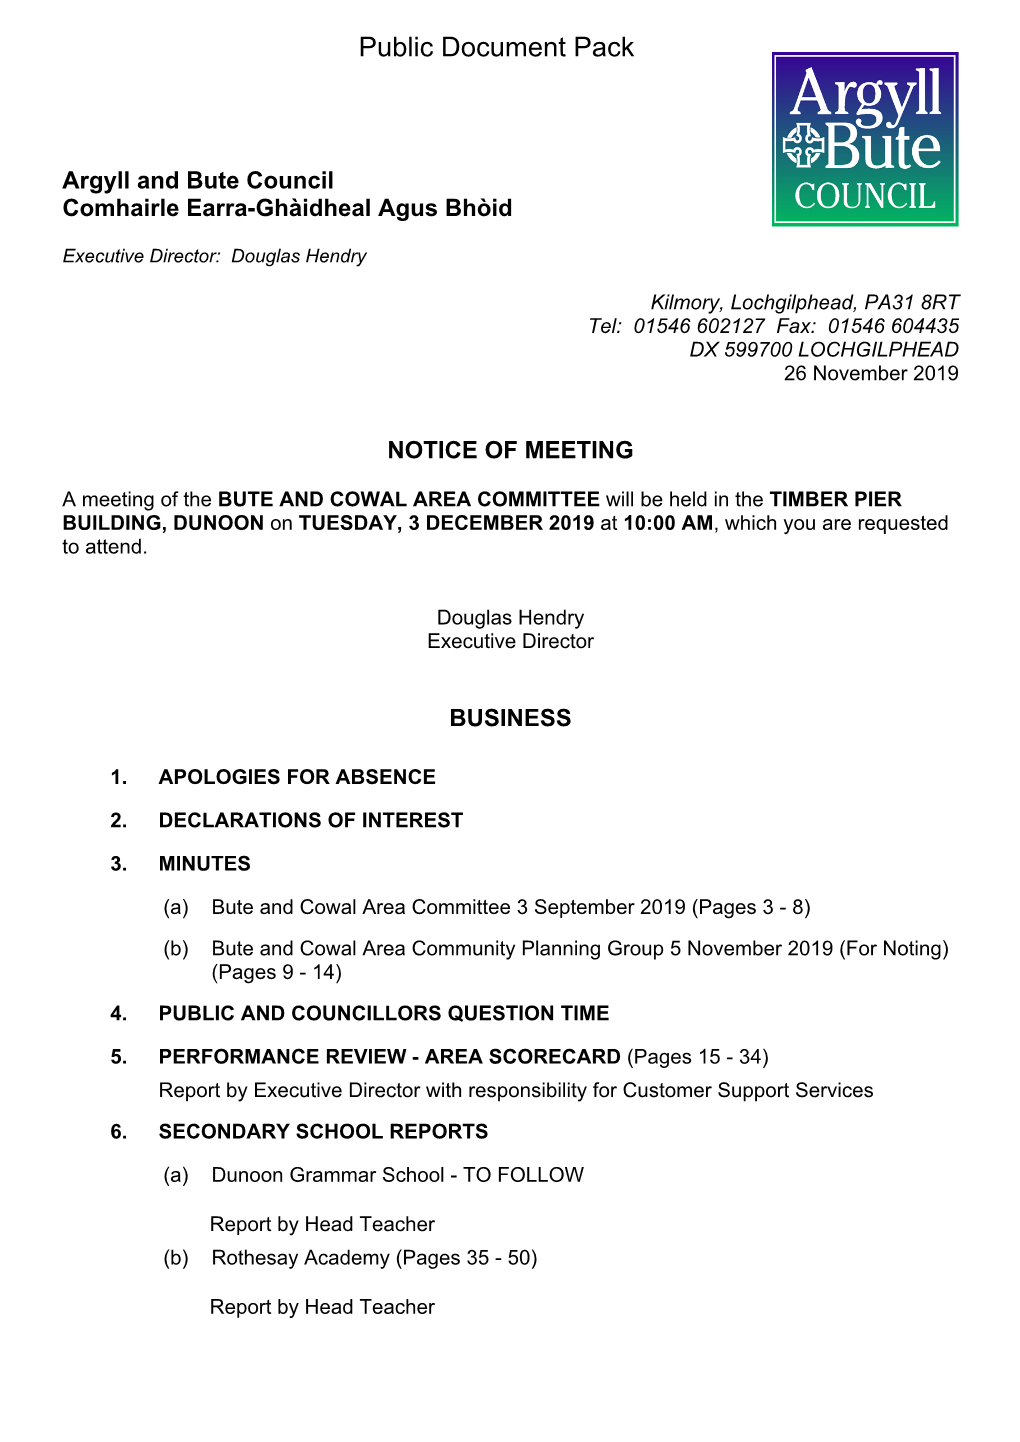 (Public Pack)Agenda Document for Bute and Cowal Area Committee